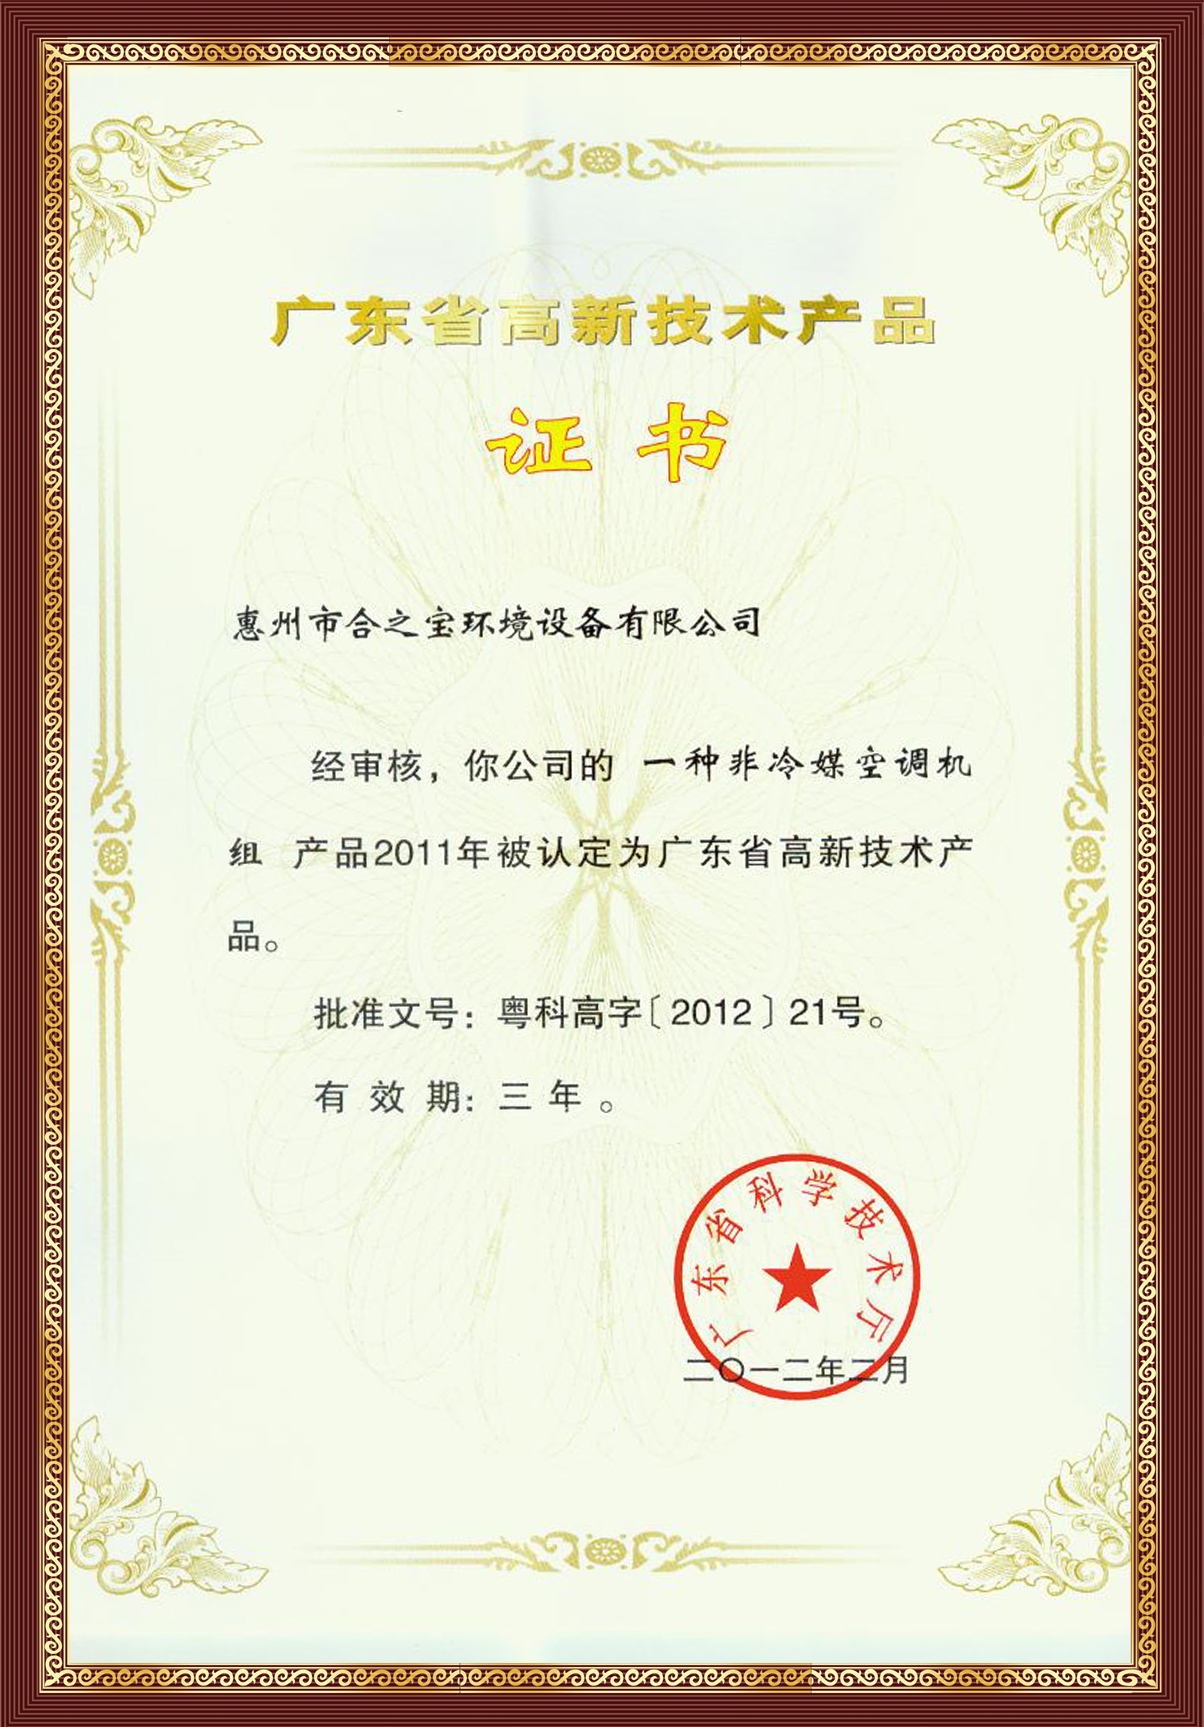 High and new product certificate